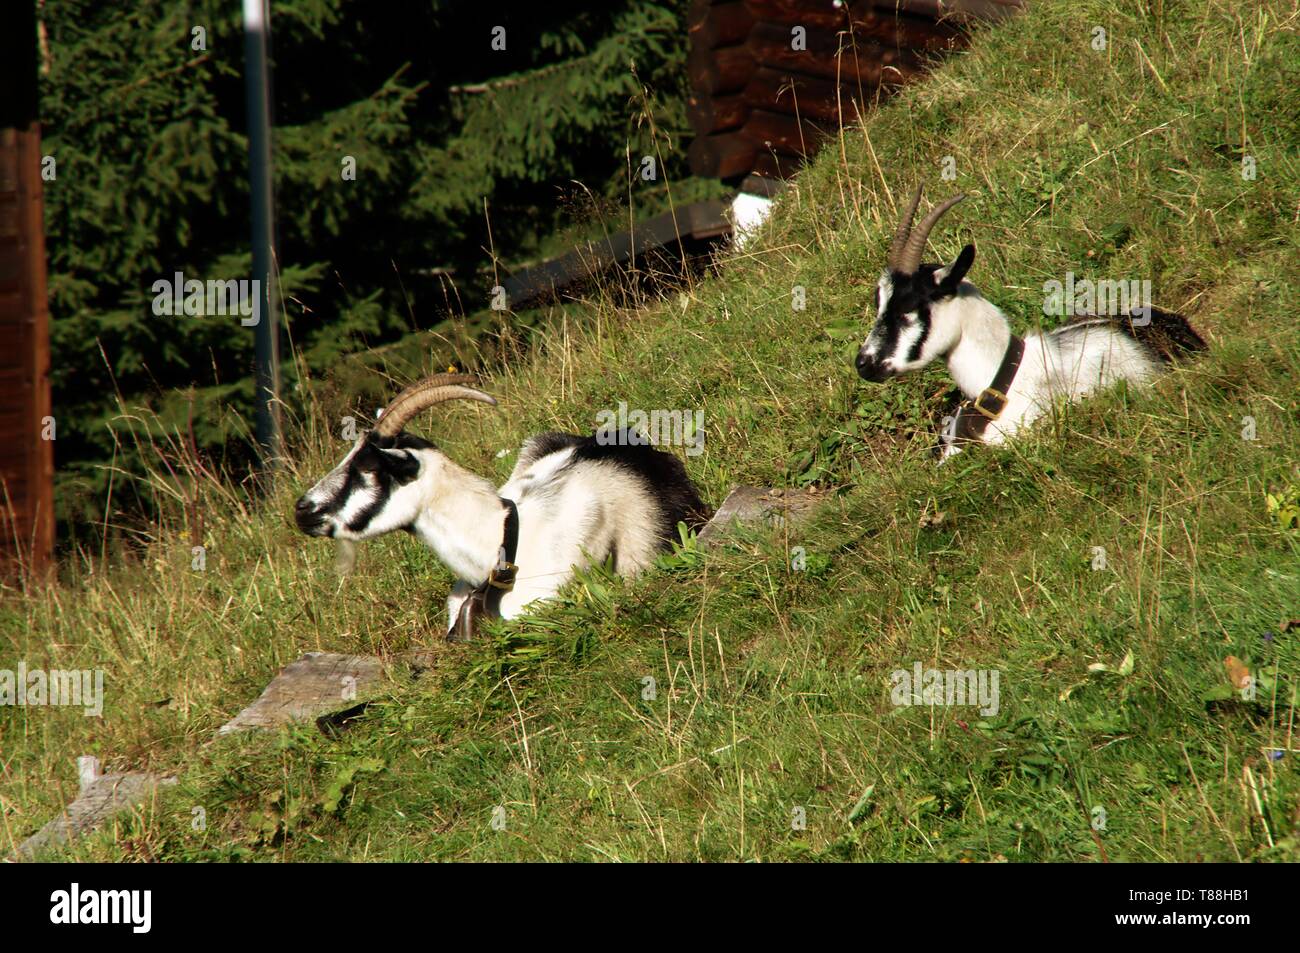 The peacock goat, a typical local breed of the Swiss Alps Stock Photo